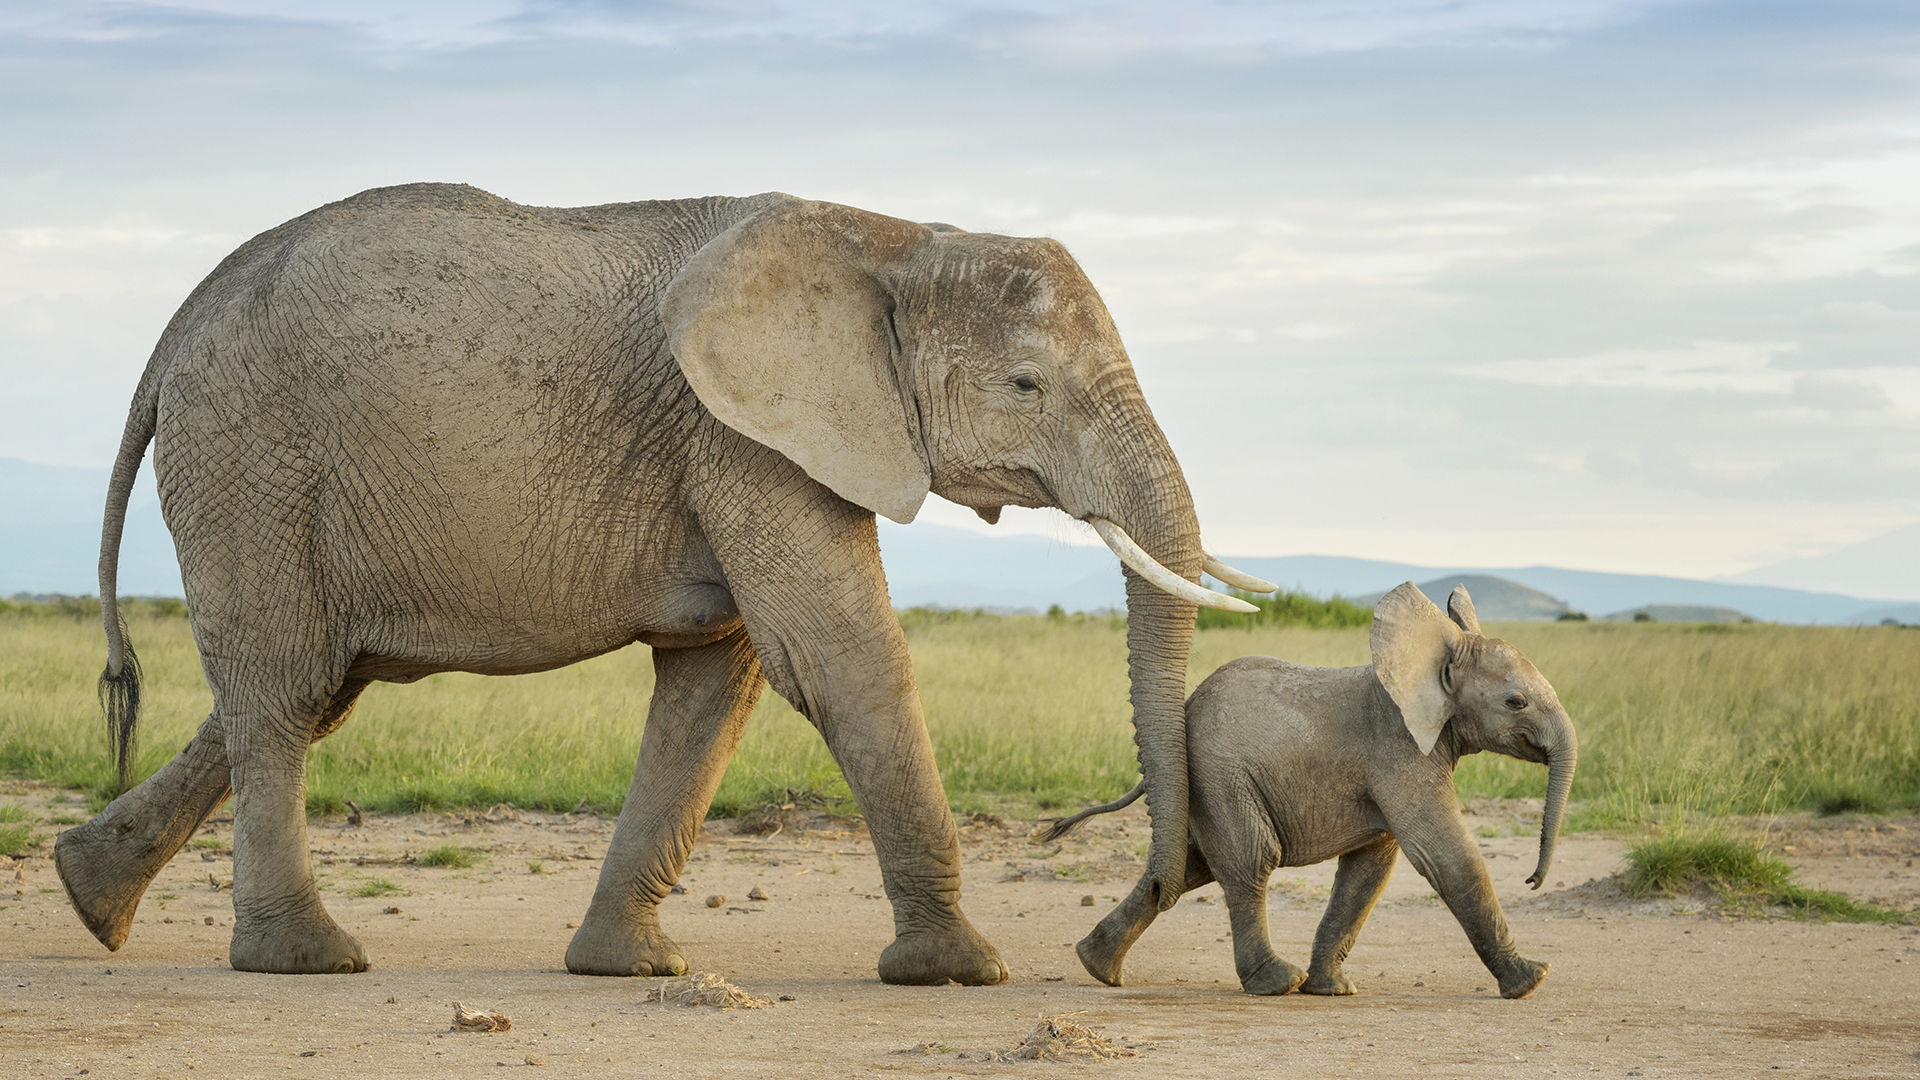 African elephant (Loxodonta africana) and calf walking in grassland, calf pushed by mother, Amboseli national park, Kenya.